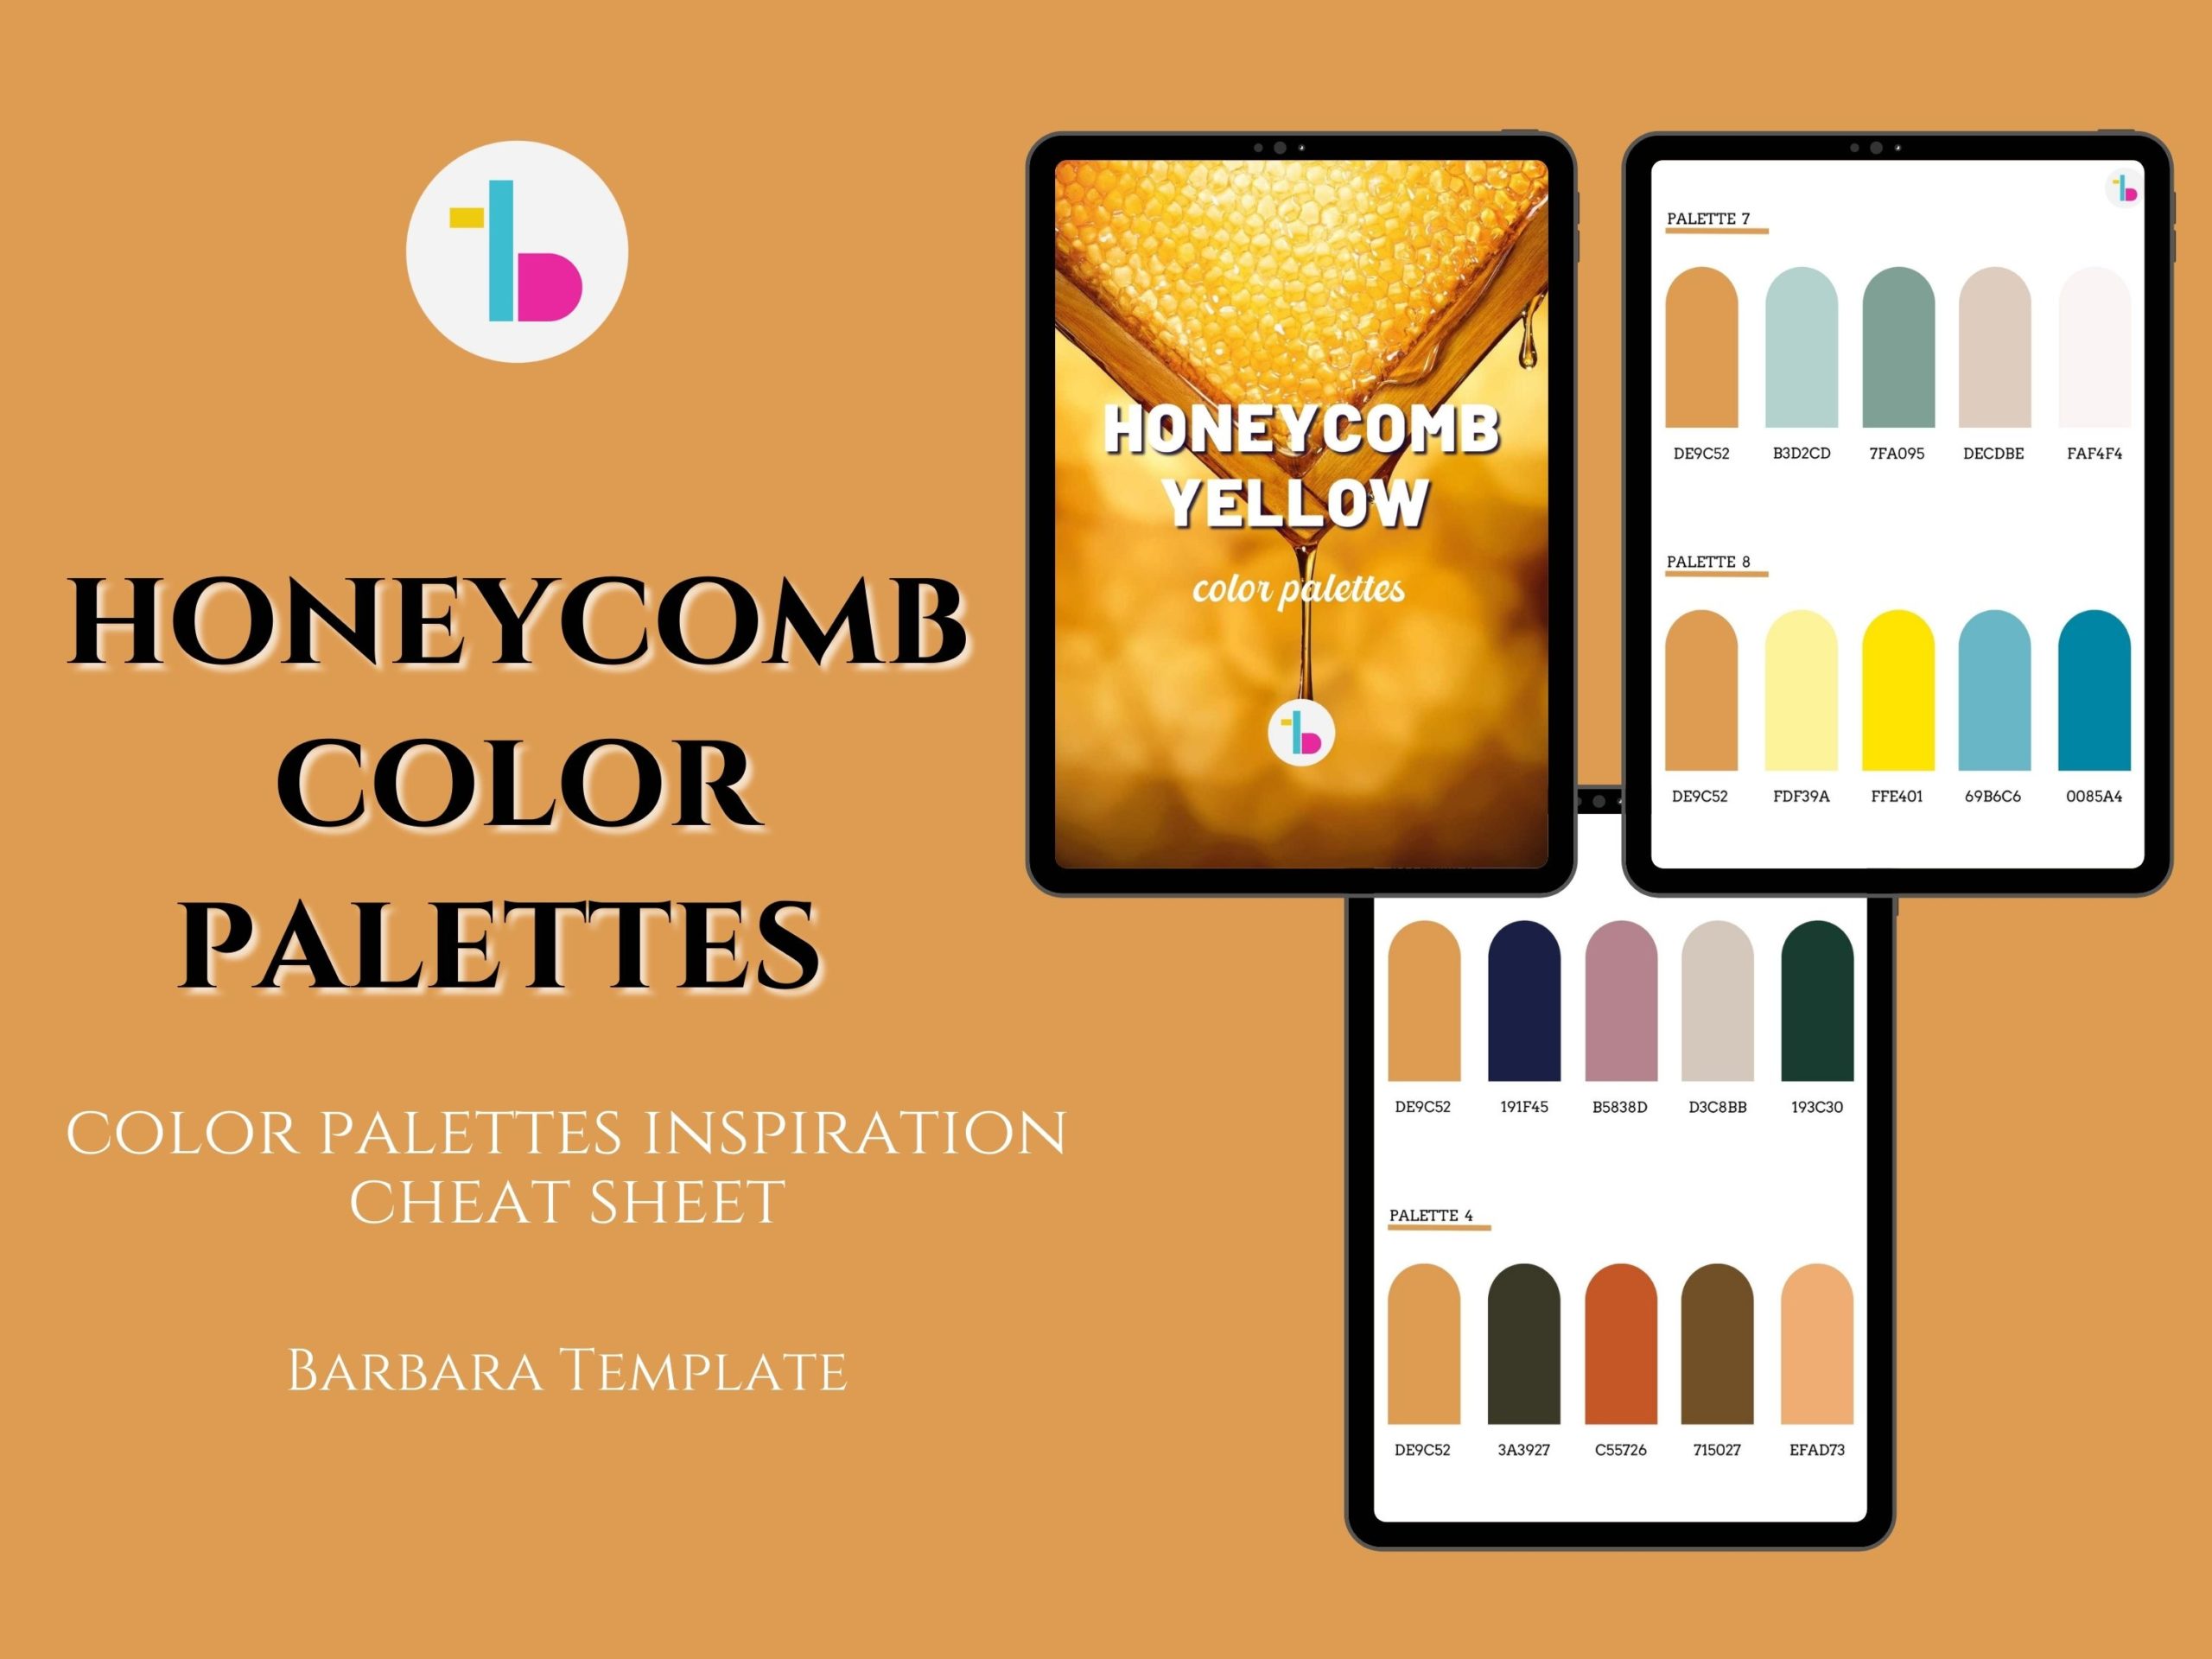 Honeycomb yellow color palette inspiration